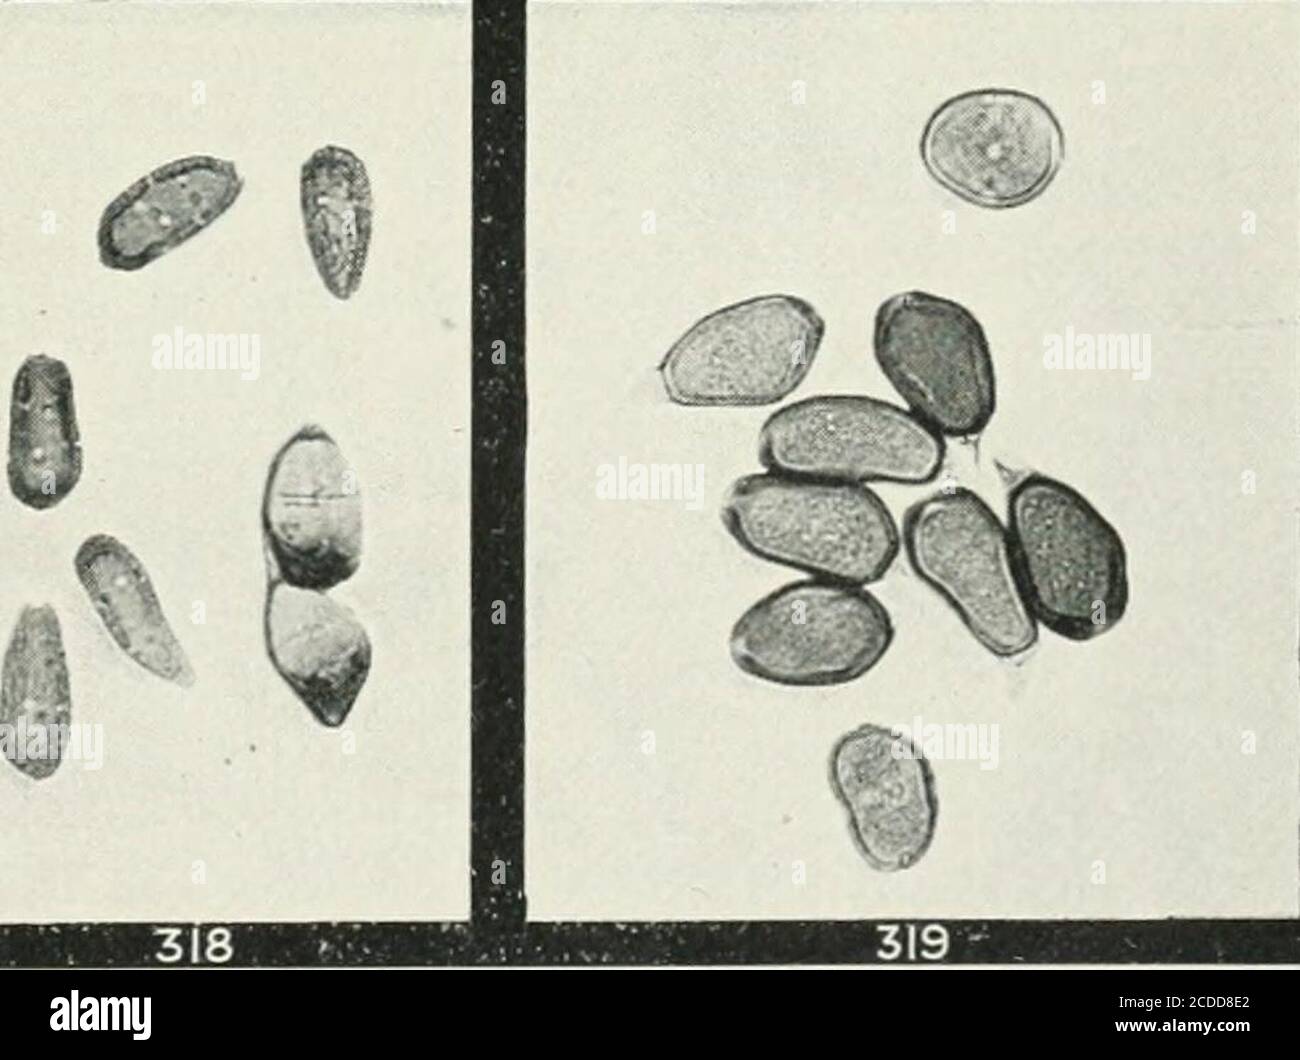 . The rusts of Australia, their structure, nature, and classification . 0 G. H. Kobinson, Phot.. PUCCINIA, UROMYCLADIUM, AND UROMYCES. 328 Explanation of Plates. PLATE XLIV. RUST-RESISTING and RUST-LIABLE WHEATS. Fig. 320. Rerraf, a variety of wheat generally found to be rust-resisting, and the straw is shown to be perfectly clean. 321. Queens Jubilee, a rust-liable variety, grown alongside of the other, and badly attacked by Puccinia graminis. Plate XLIV Stock Photo